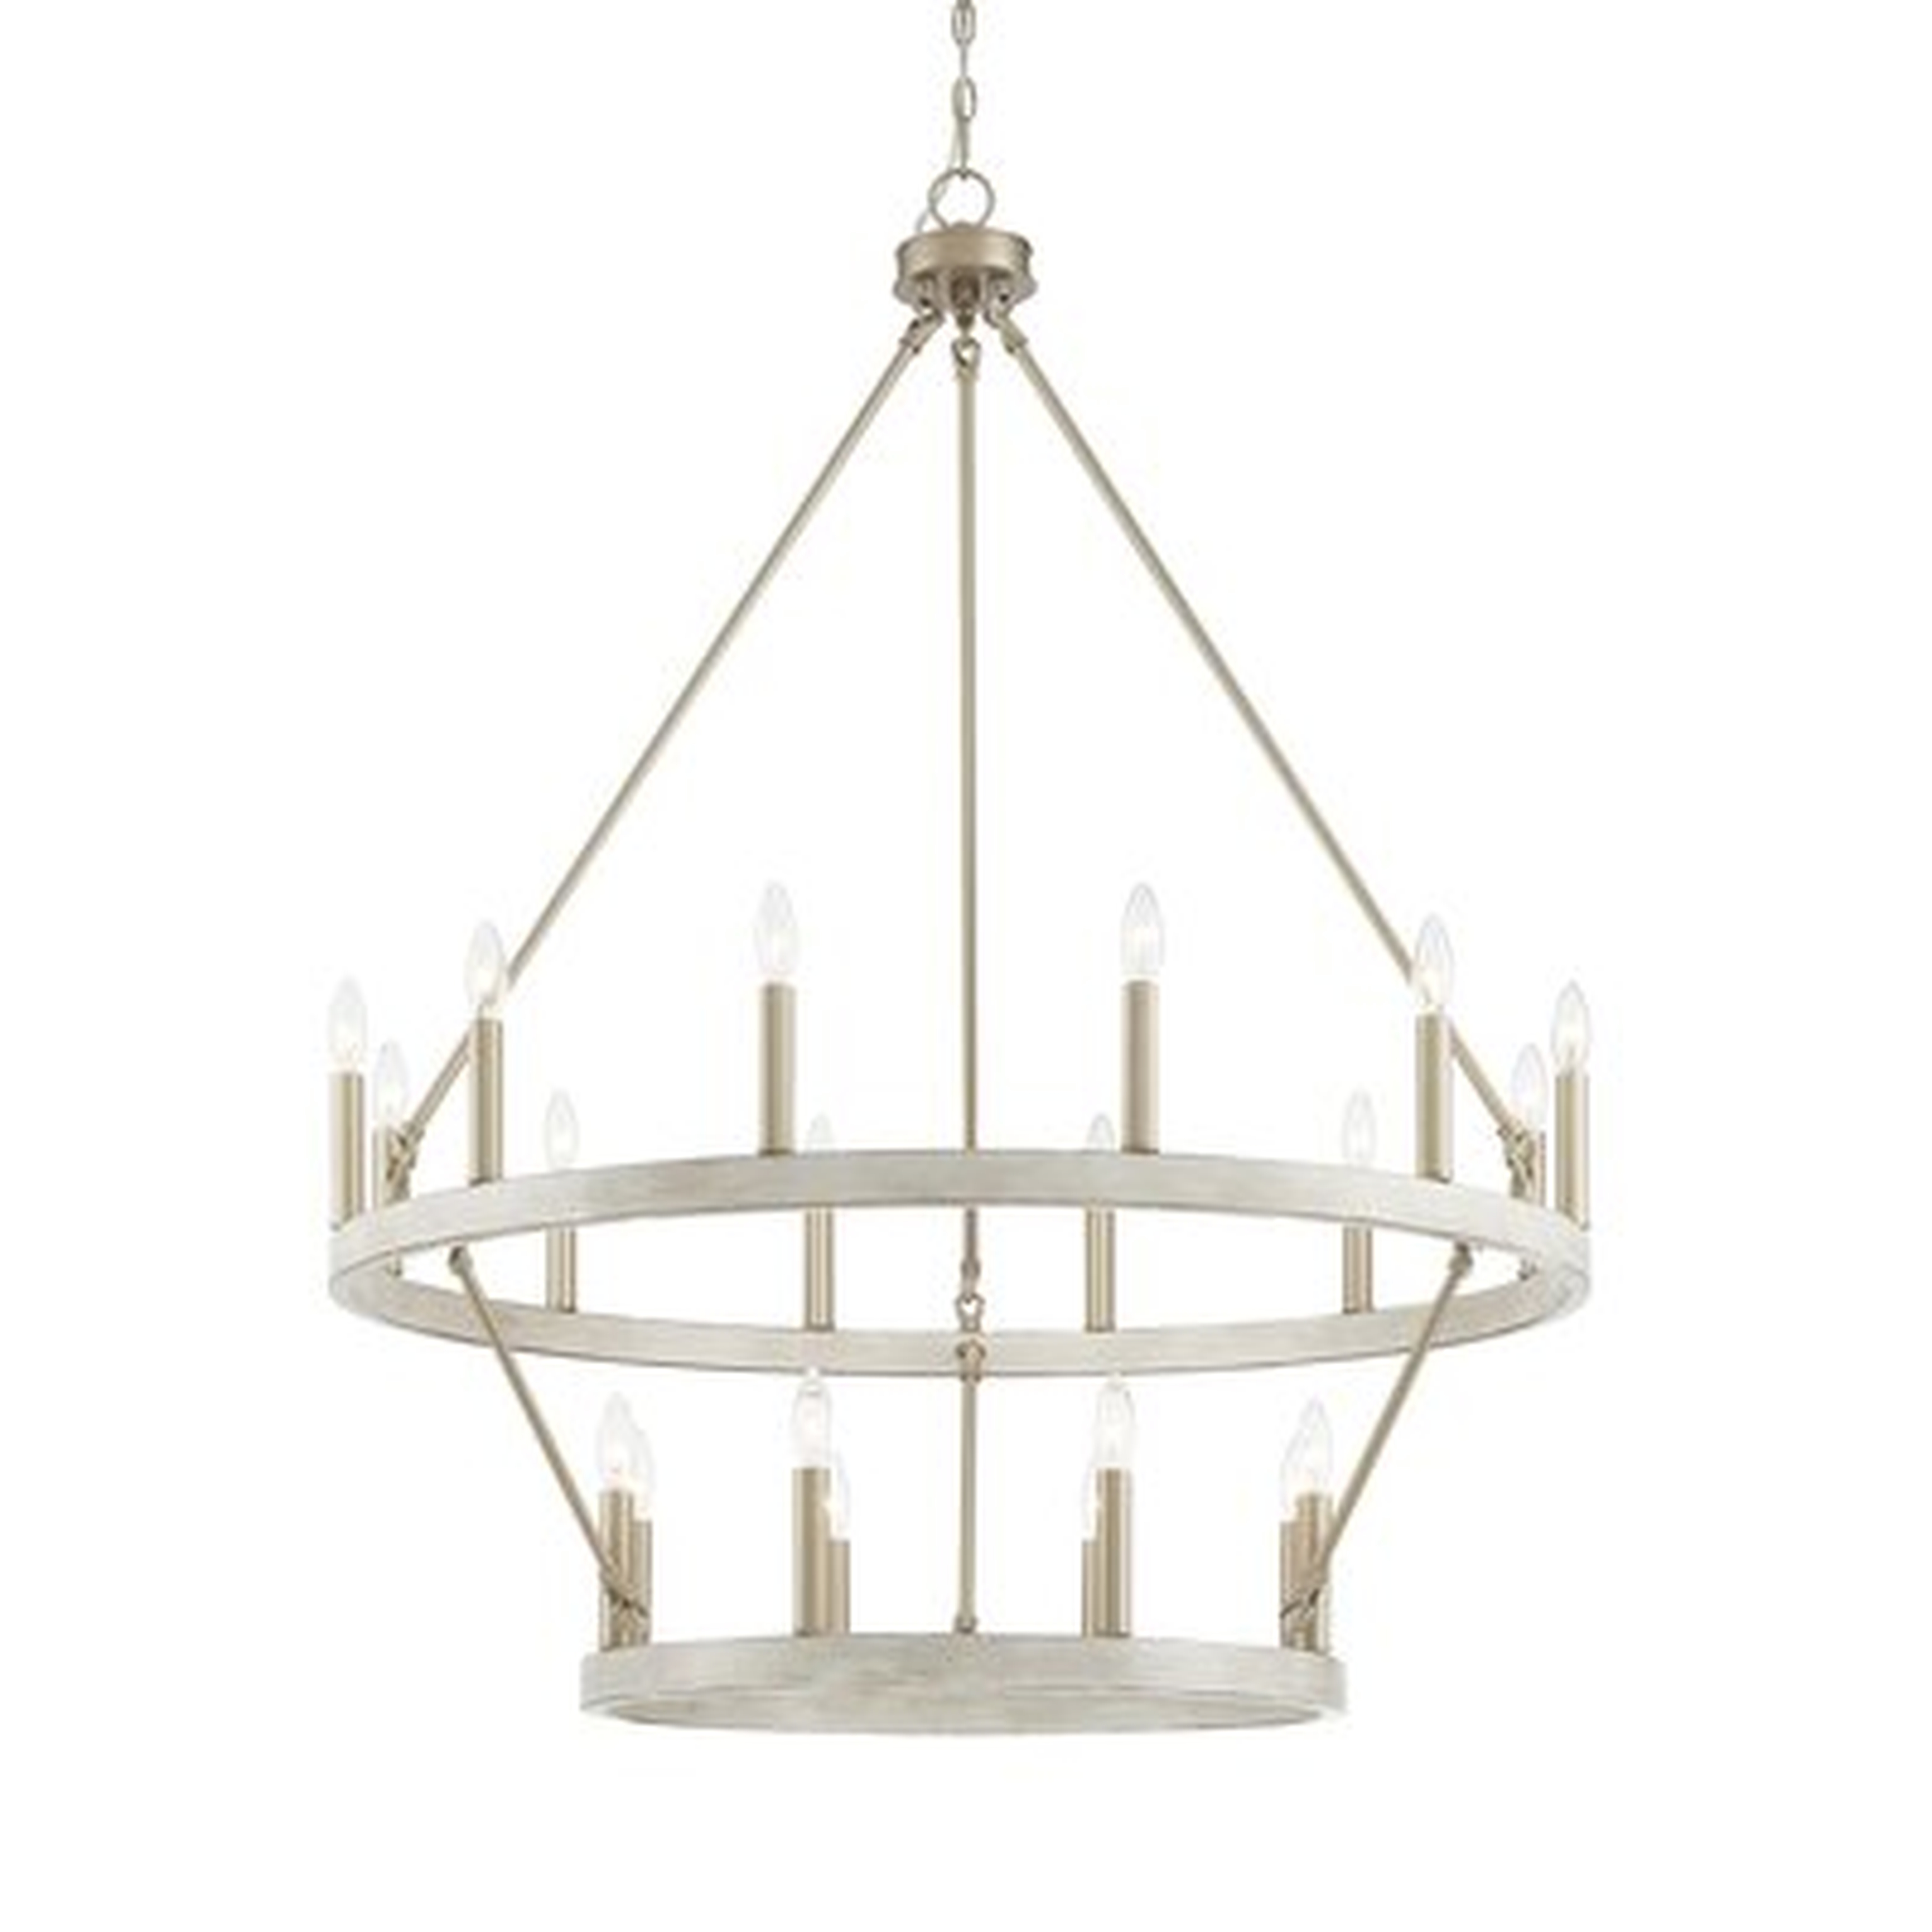 Claghorn 20 - Light Candle Style Wagon Wheel Chandelier with Wood Accents - Wayfair